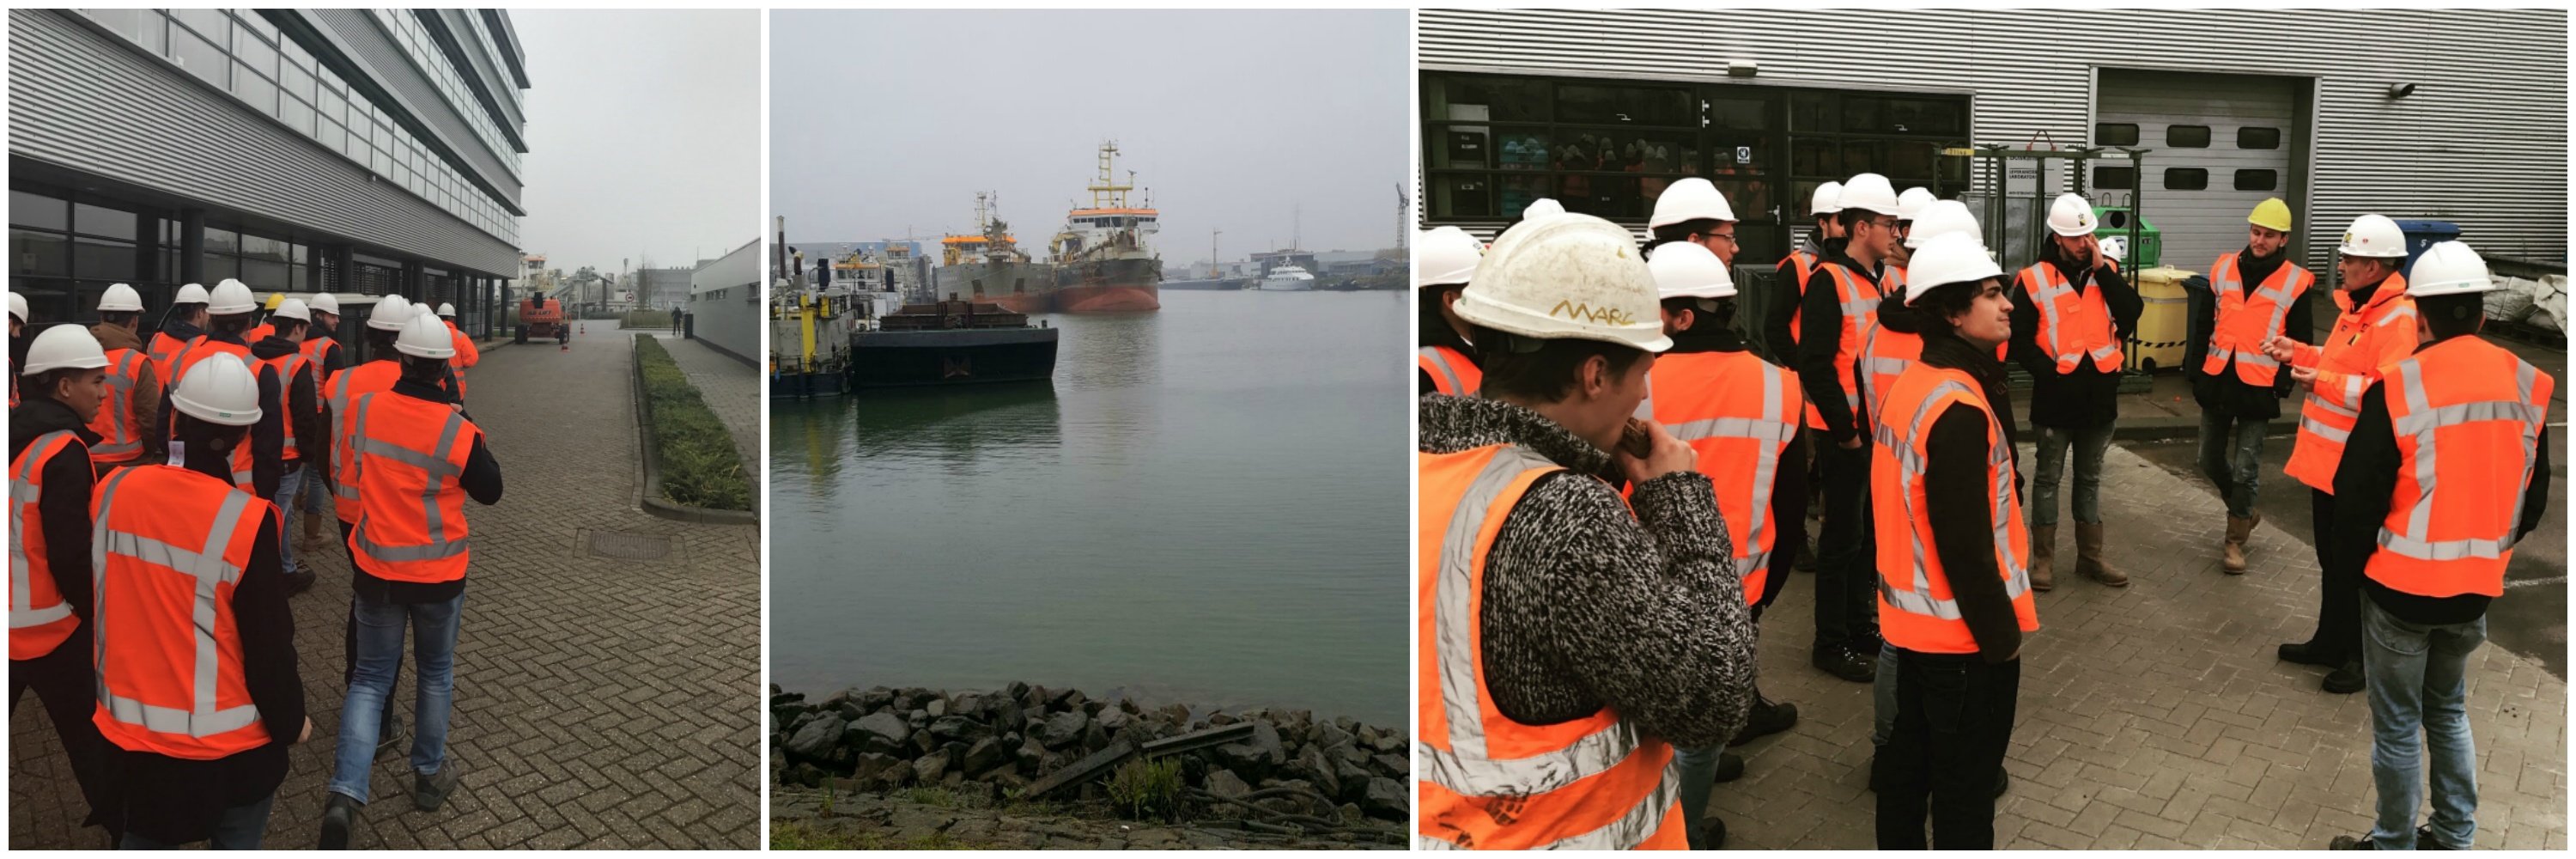 boskalis excursion field trip civil engineering hz outside of classroom studying